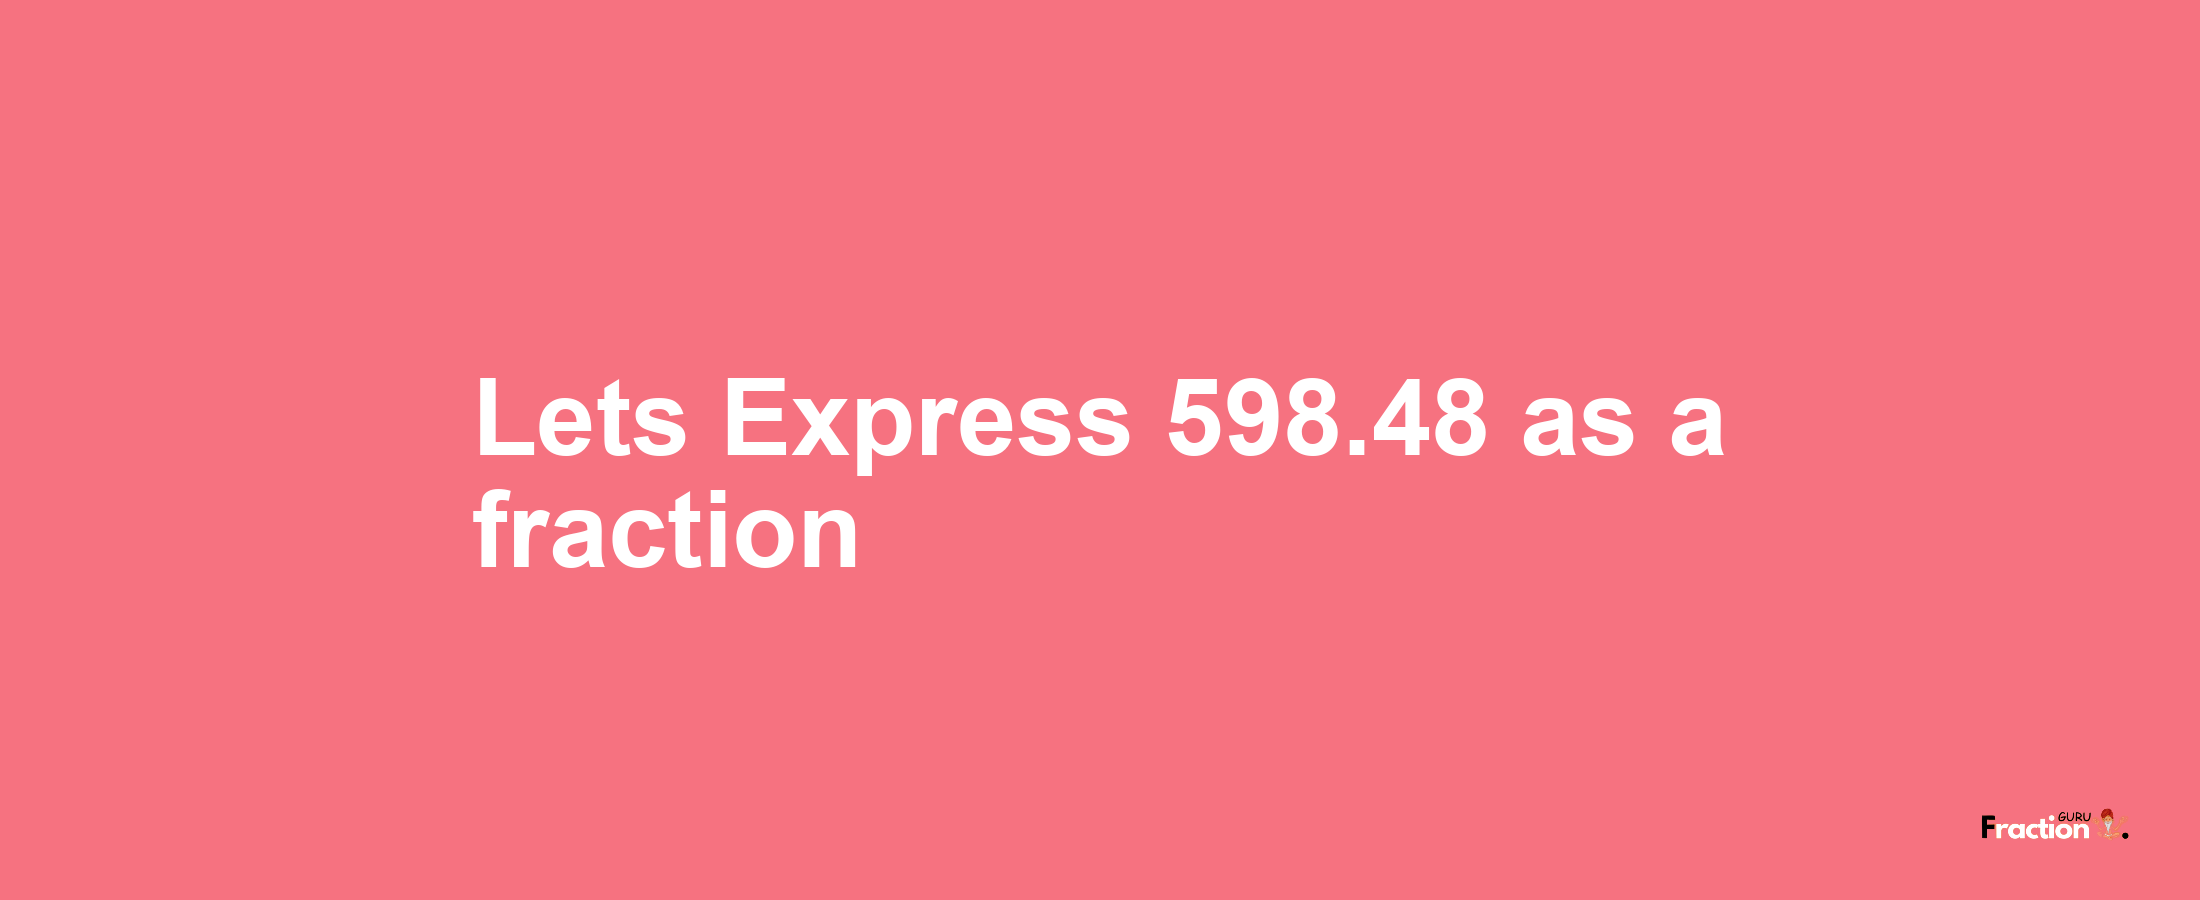 Lets Express 598.48 as afraction